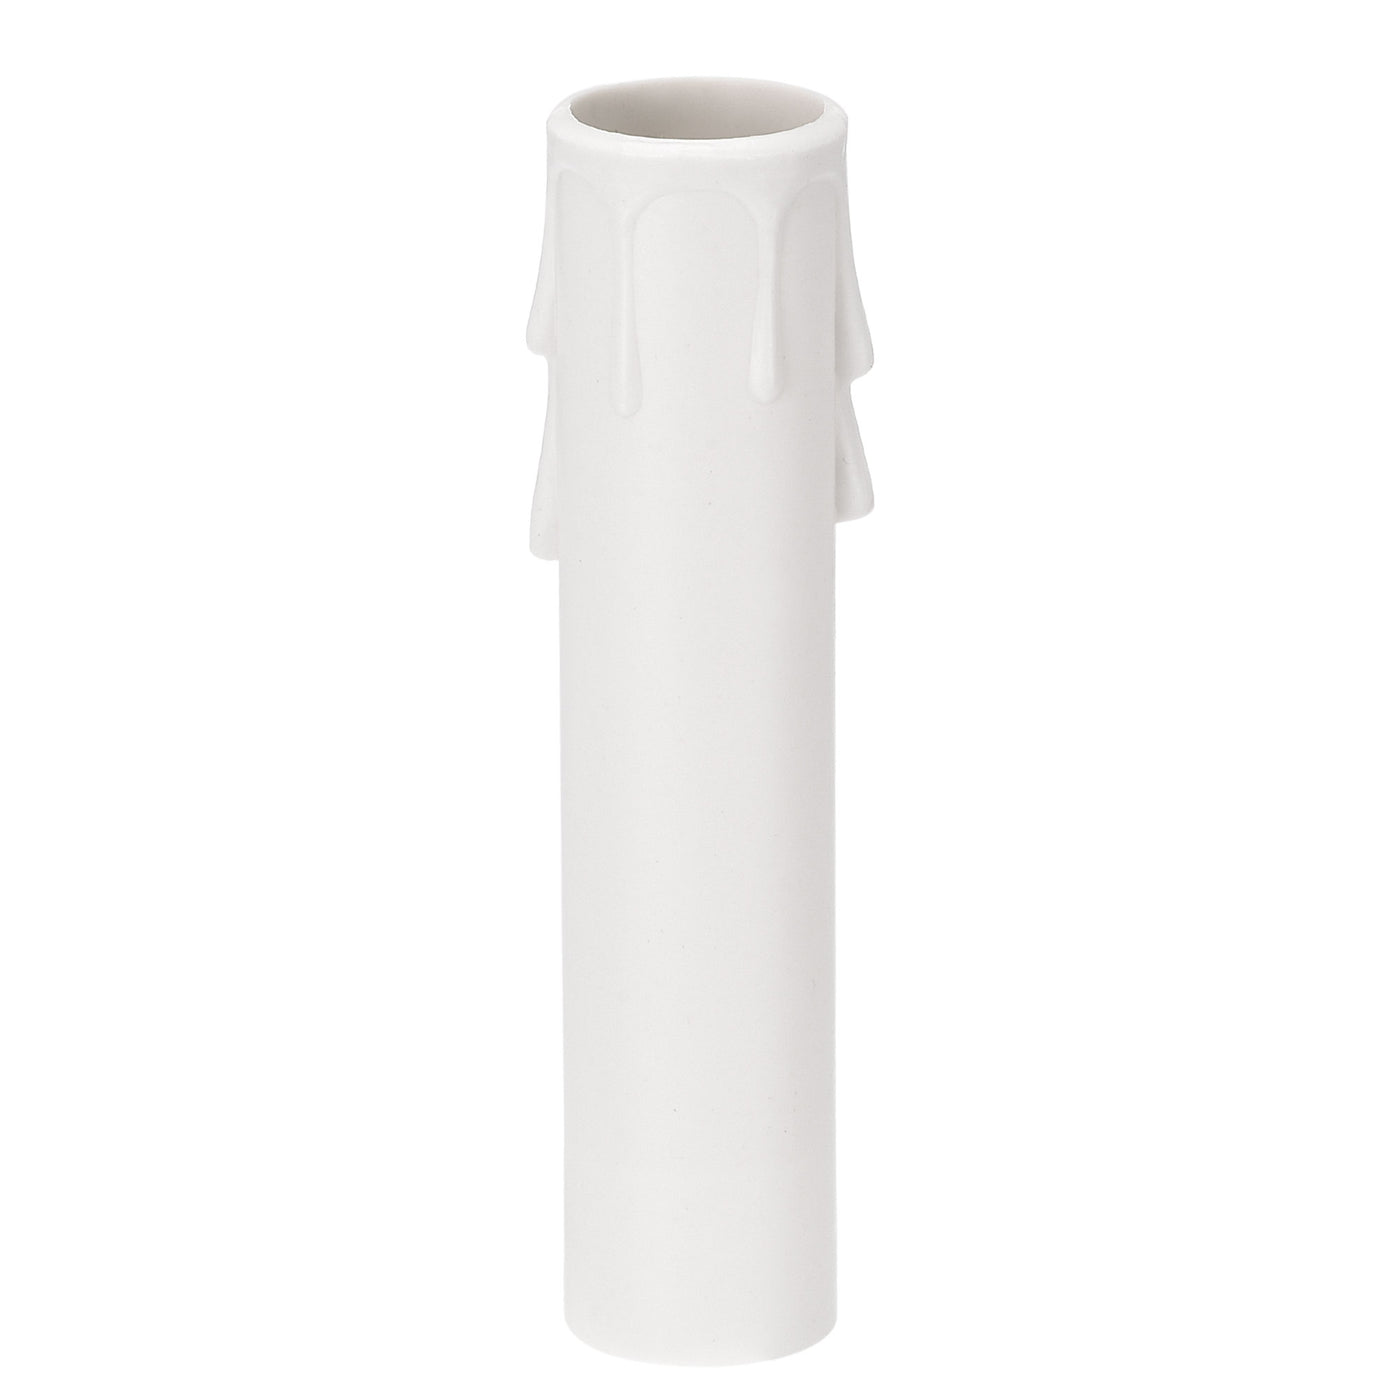 Uxcell Uxcell Plastic 4 Inch Candelabra Base for E12 Candle Socket Covers Sleeves Chandelier, White Pack of 24